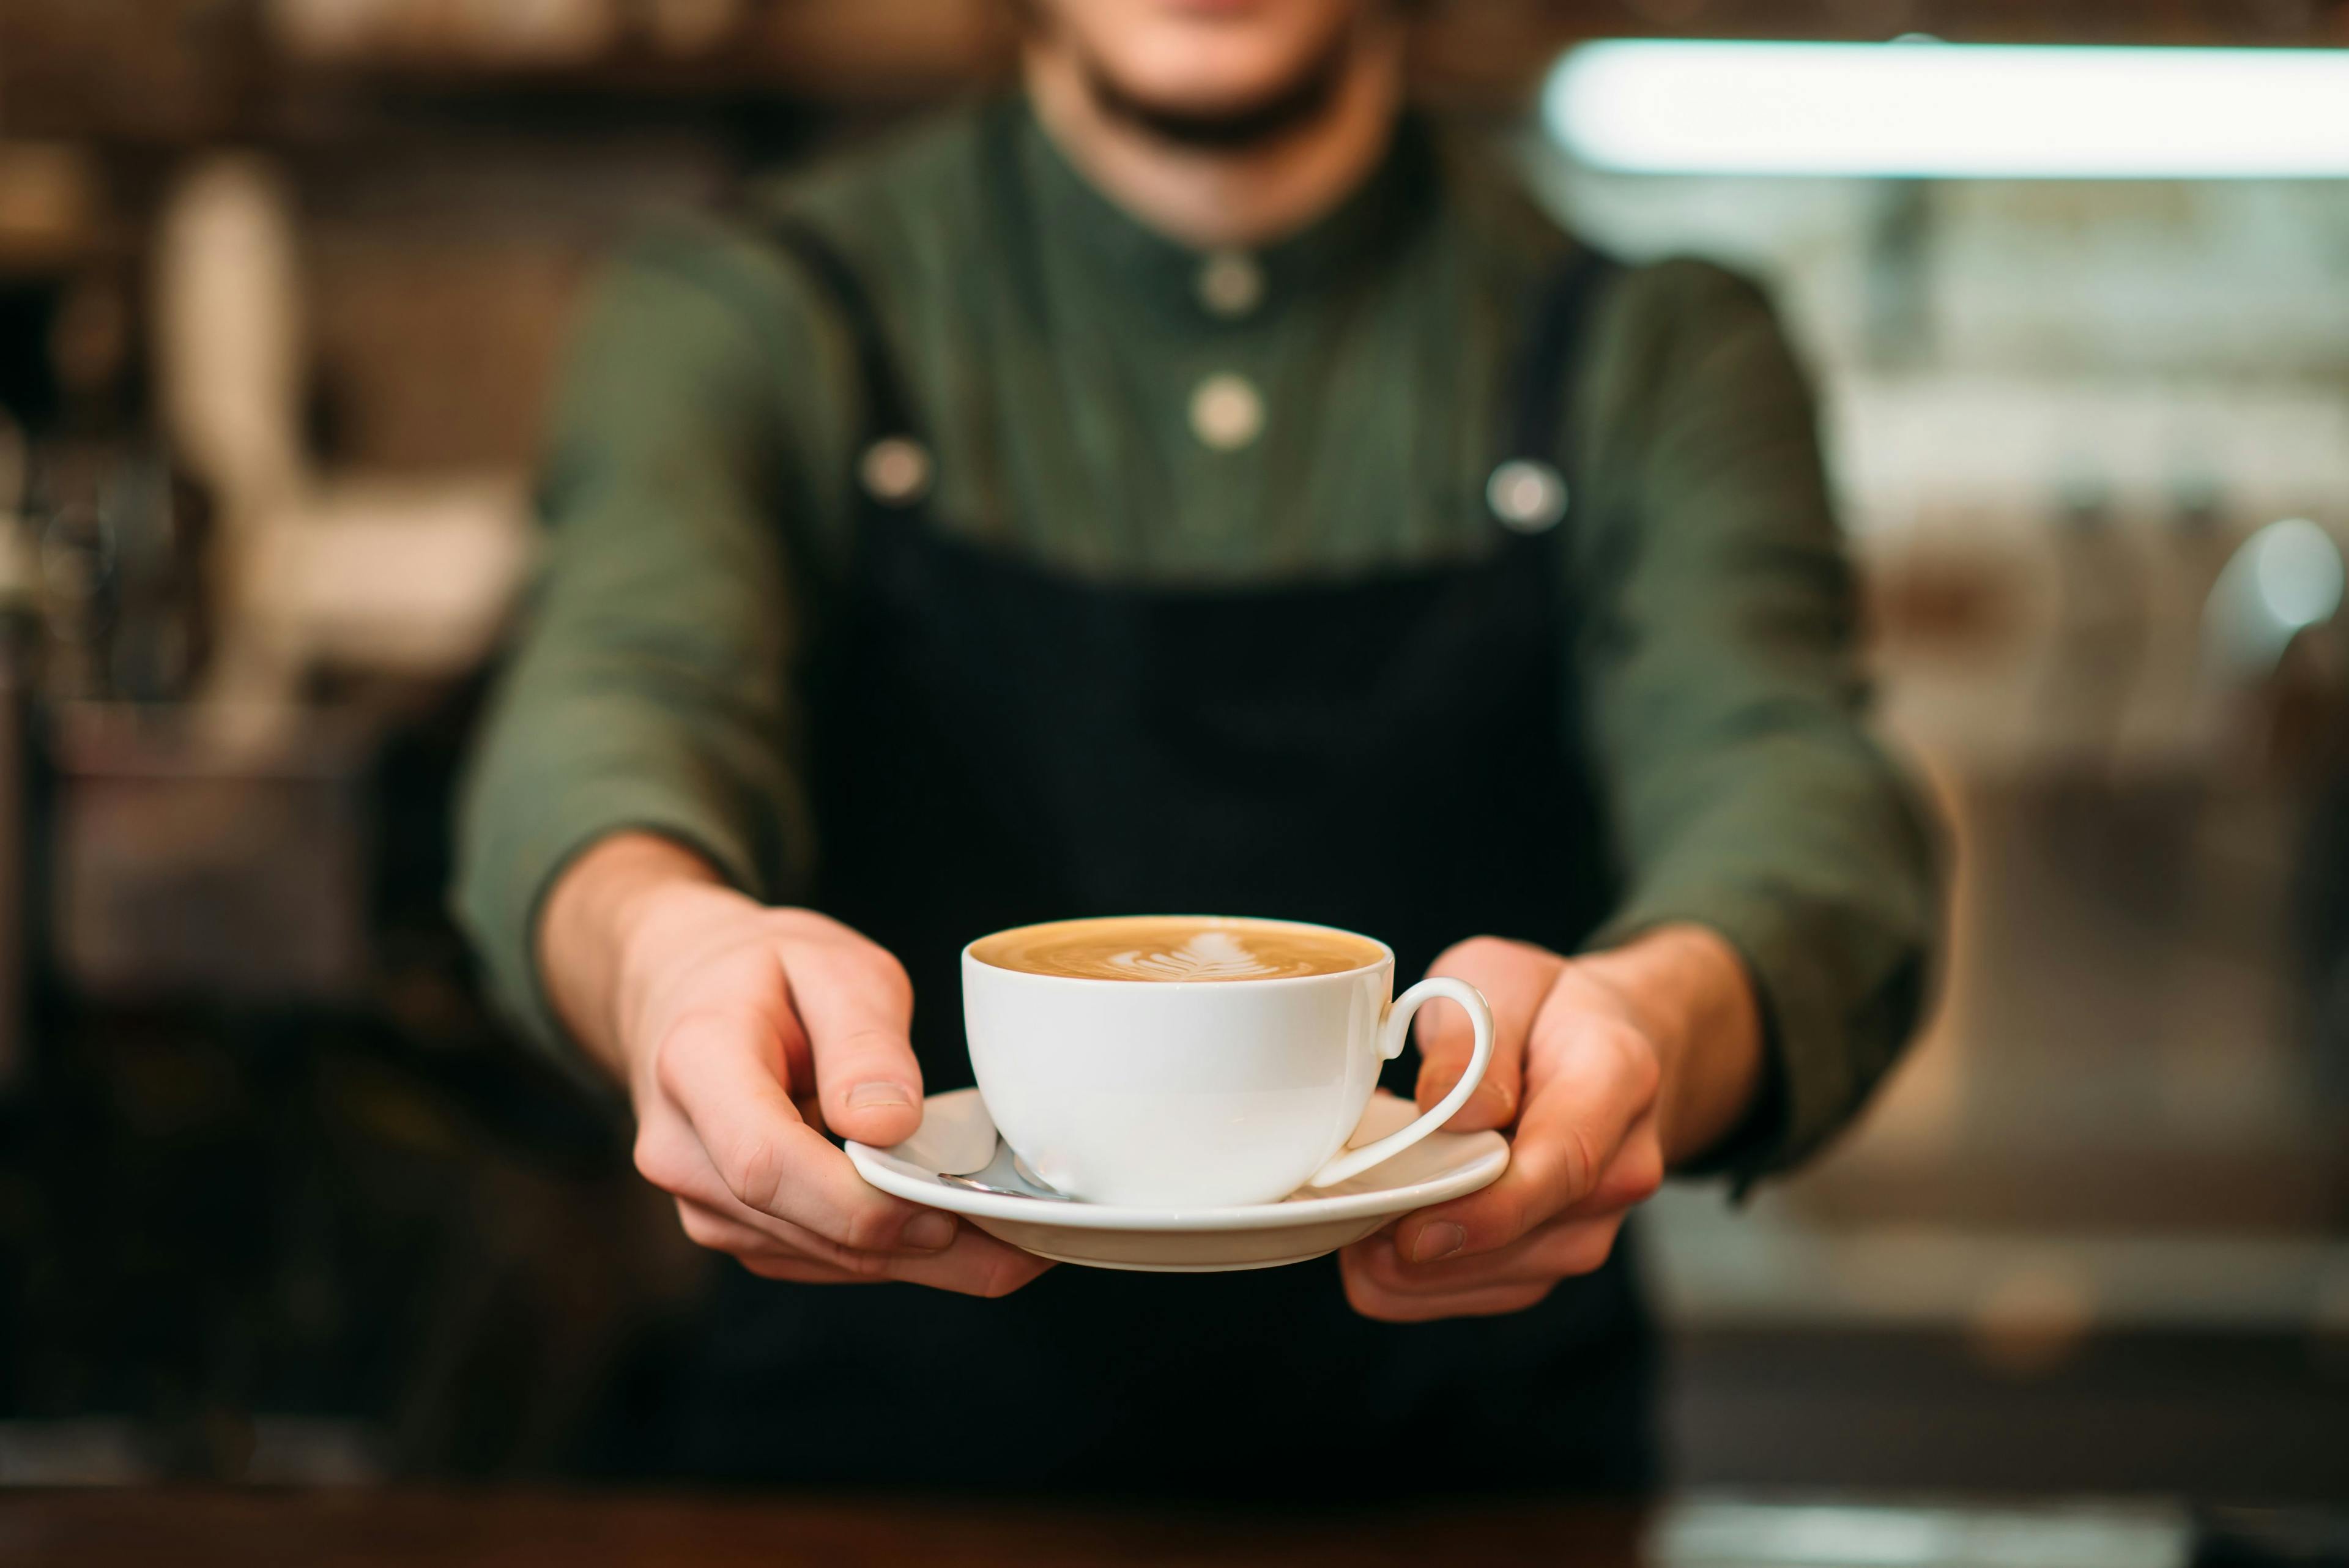 Waiter in black apron stretches a cup of coffee | Image credit: Omad_Soul - stock.adobe.com